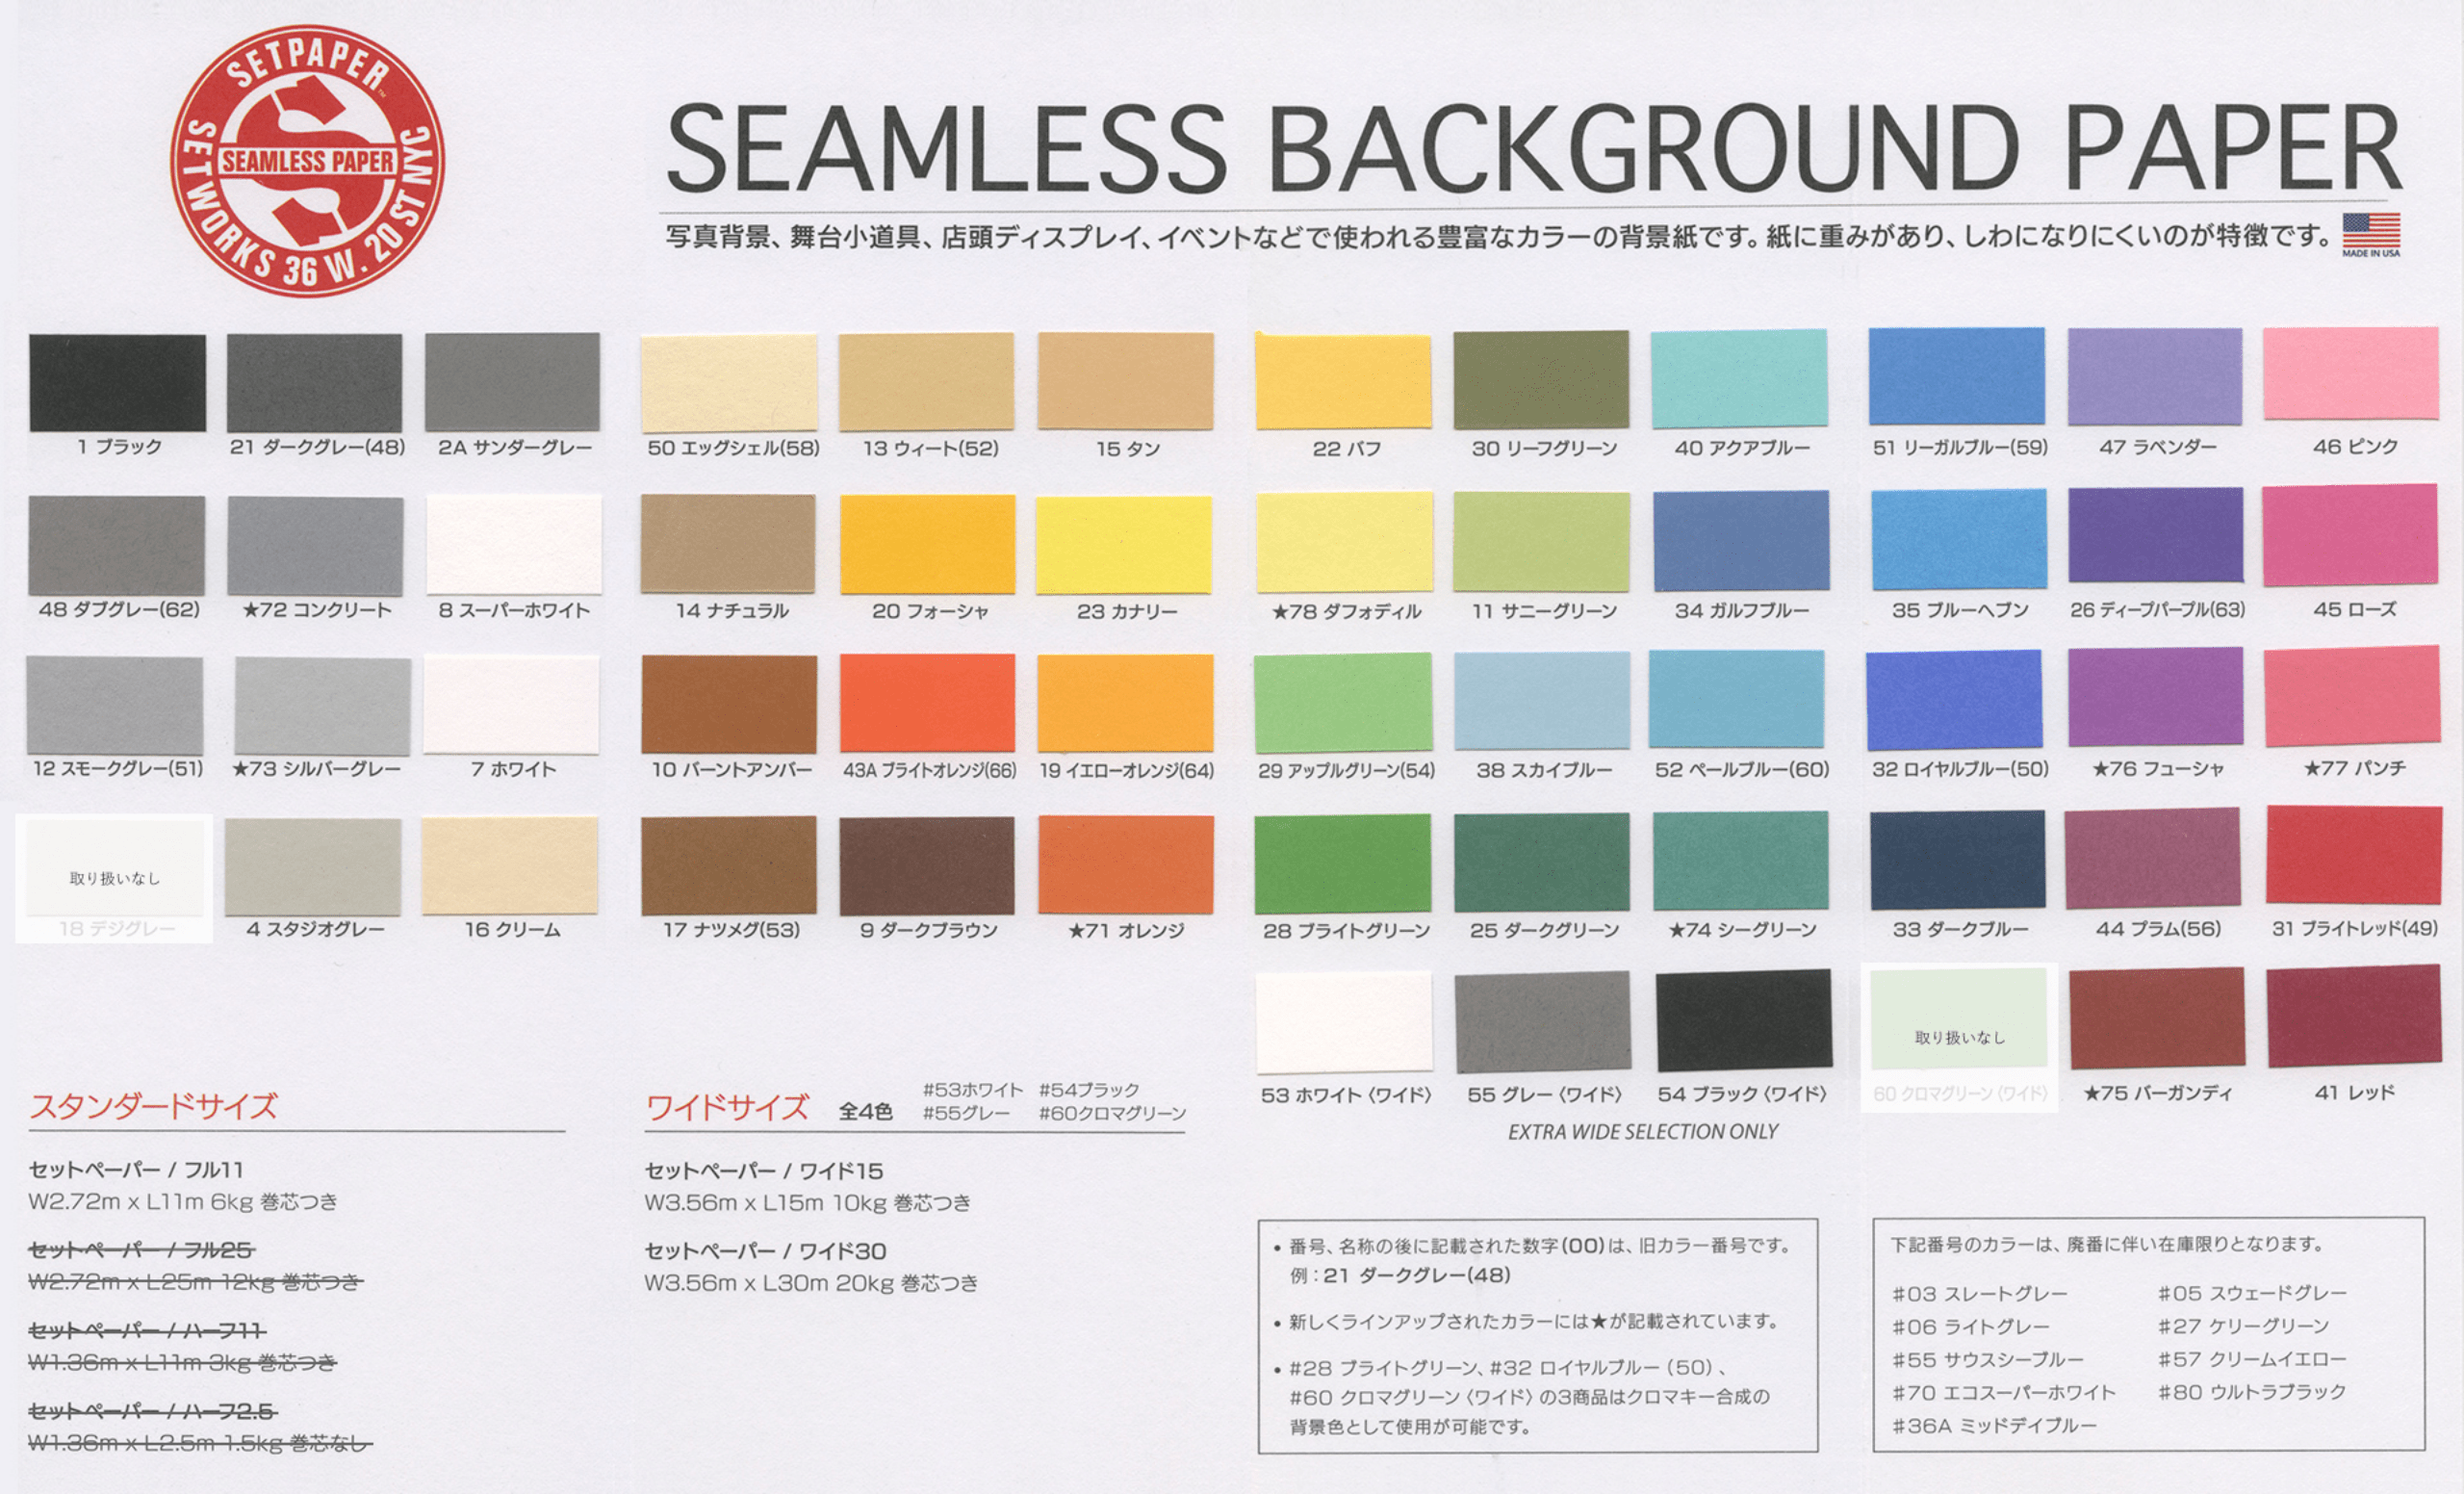 SEAMLESS BACKGROUND PAPER